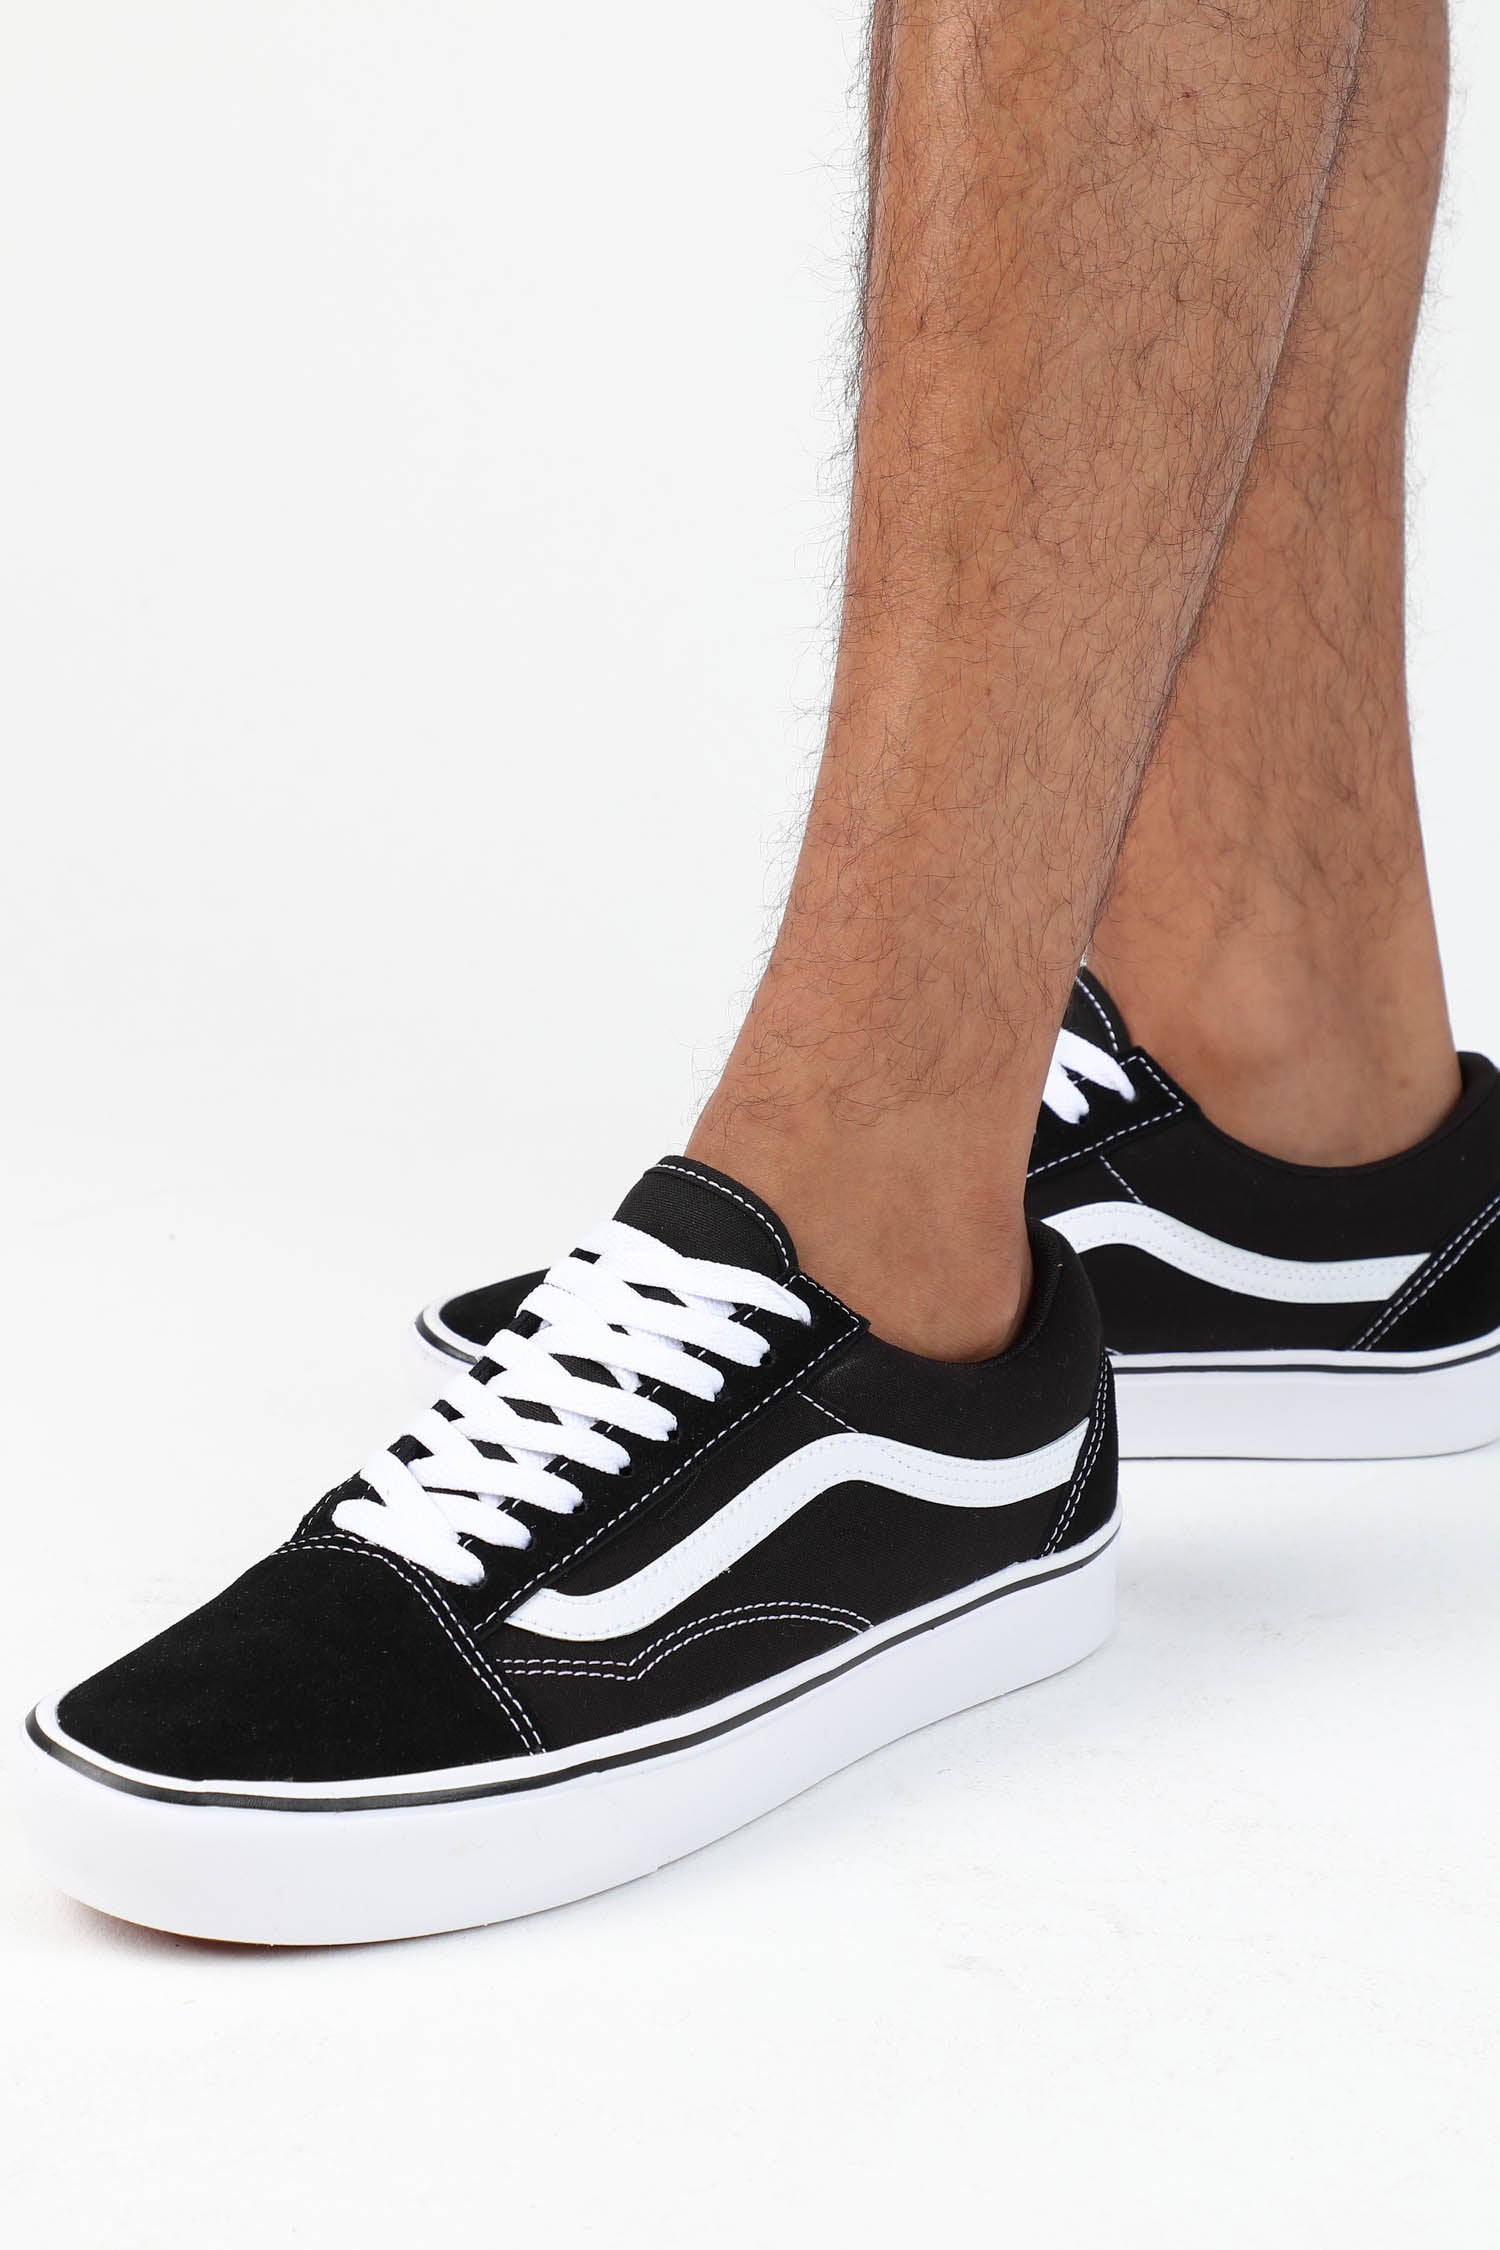 difference between vans old skool and comfycush